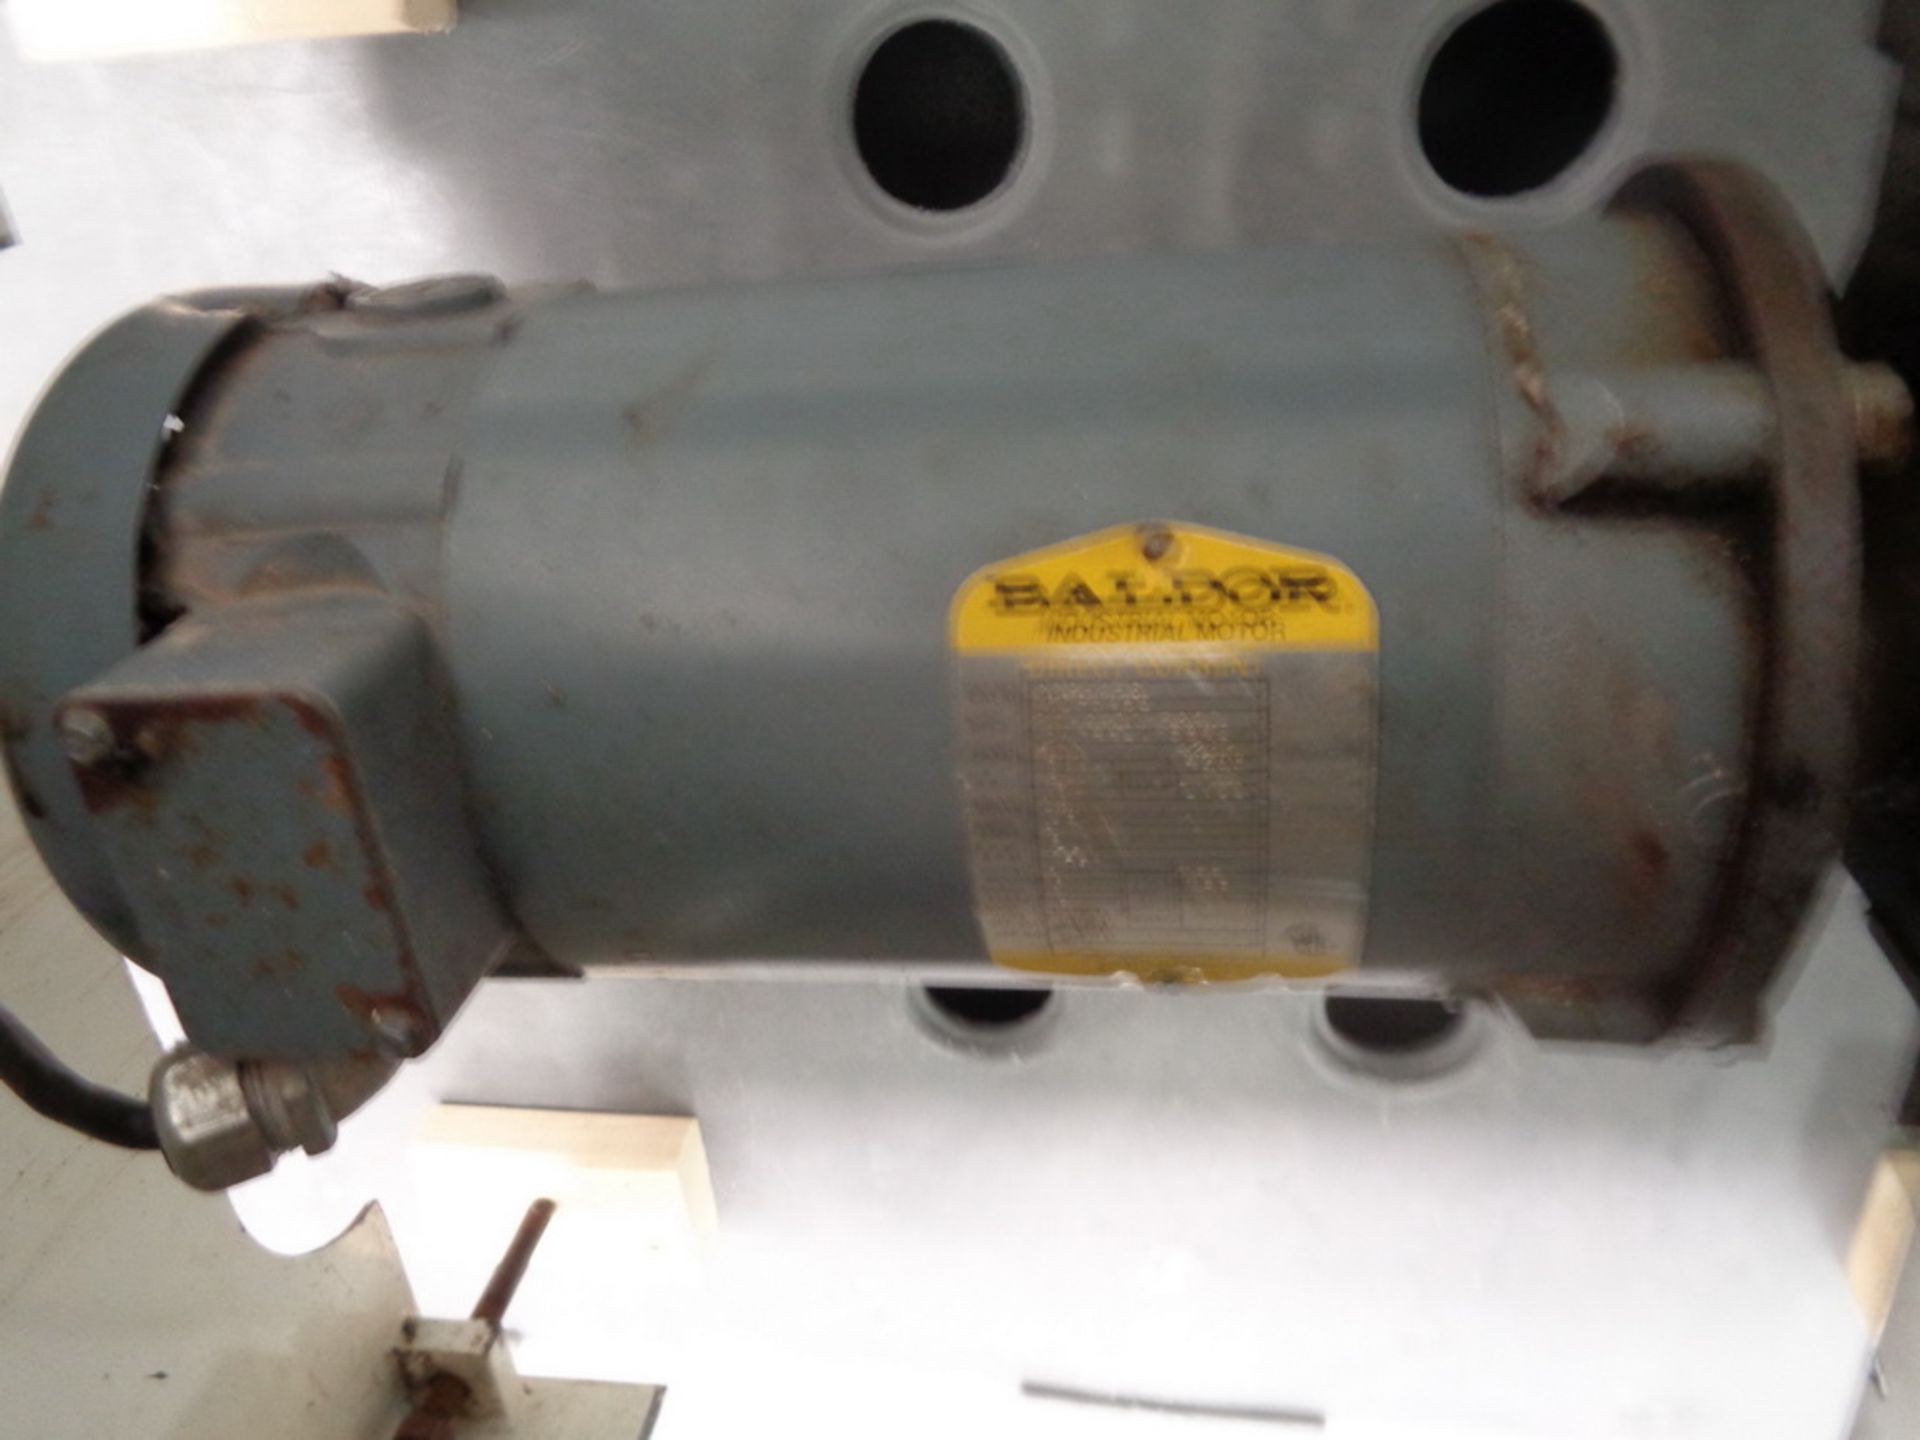 KAPS-ALL CAPPER, CONTINUOUS MOTION 4 SPINDLE TYPE, MODEL D, SERIAL NUMBER 2415. - Image 8 of 8